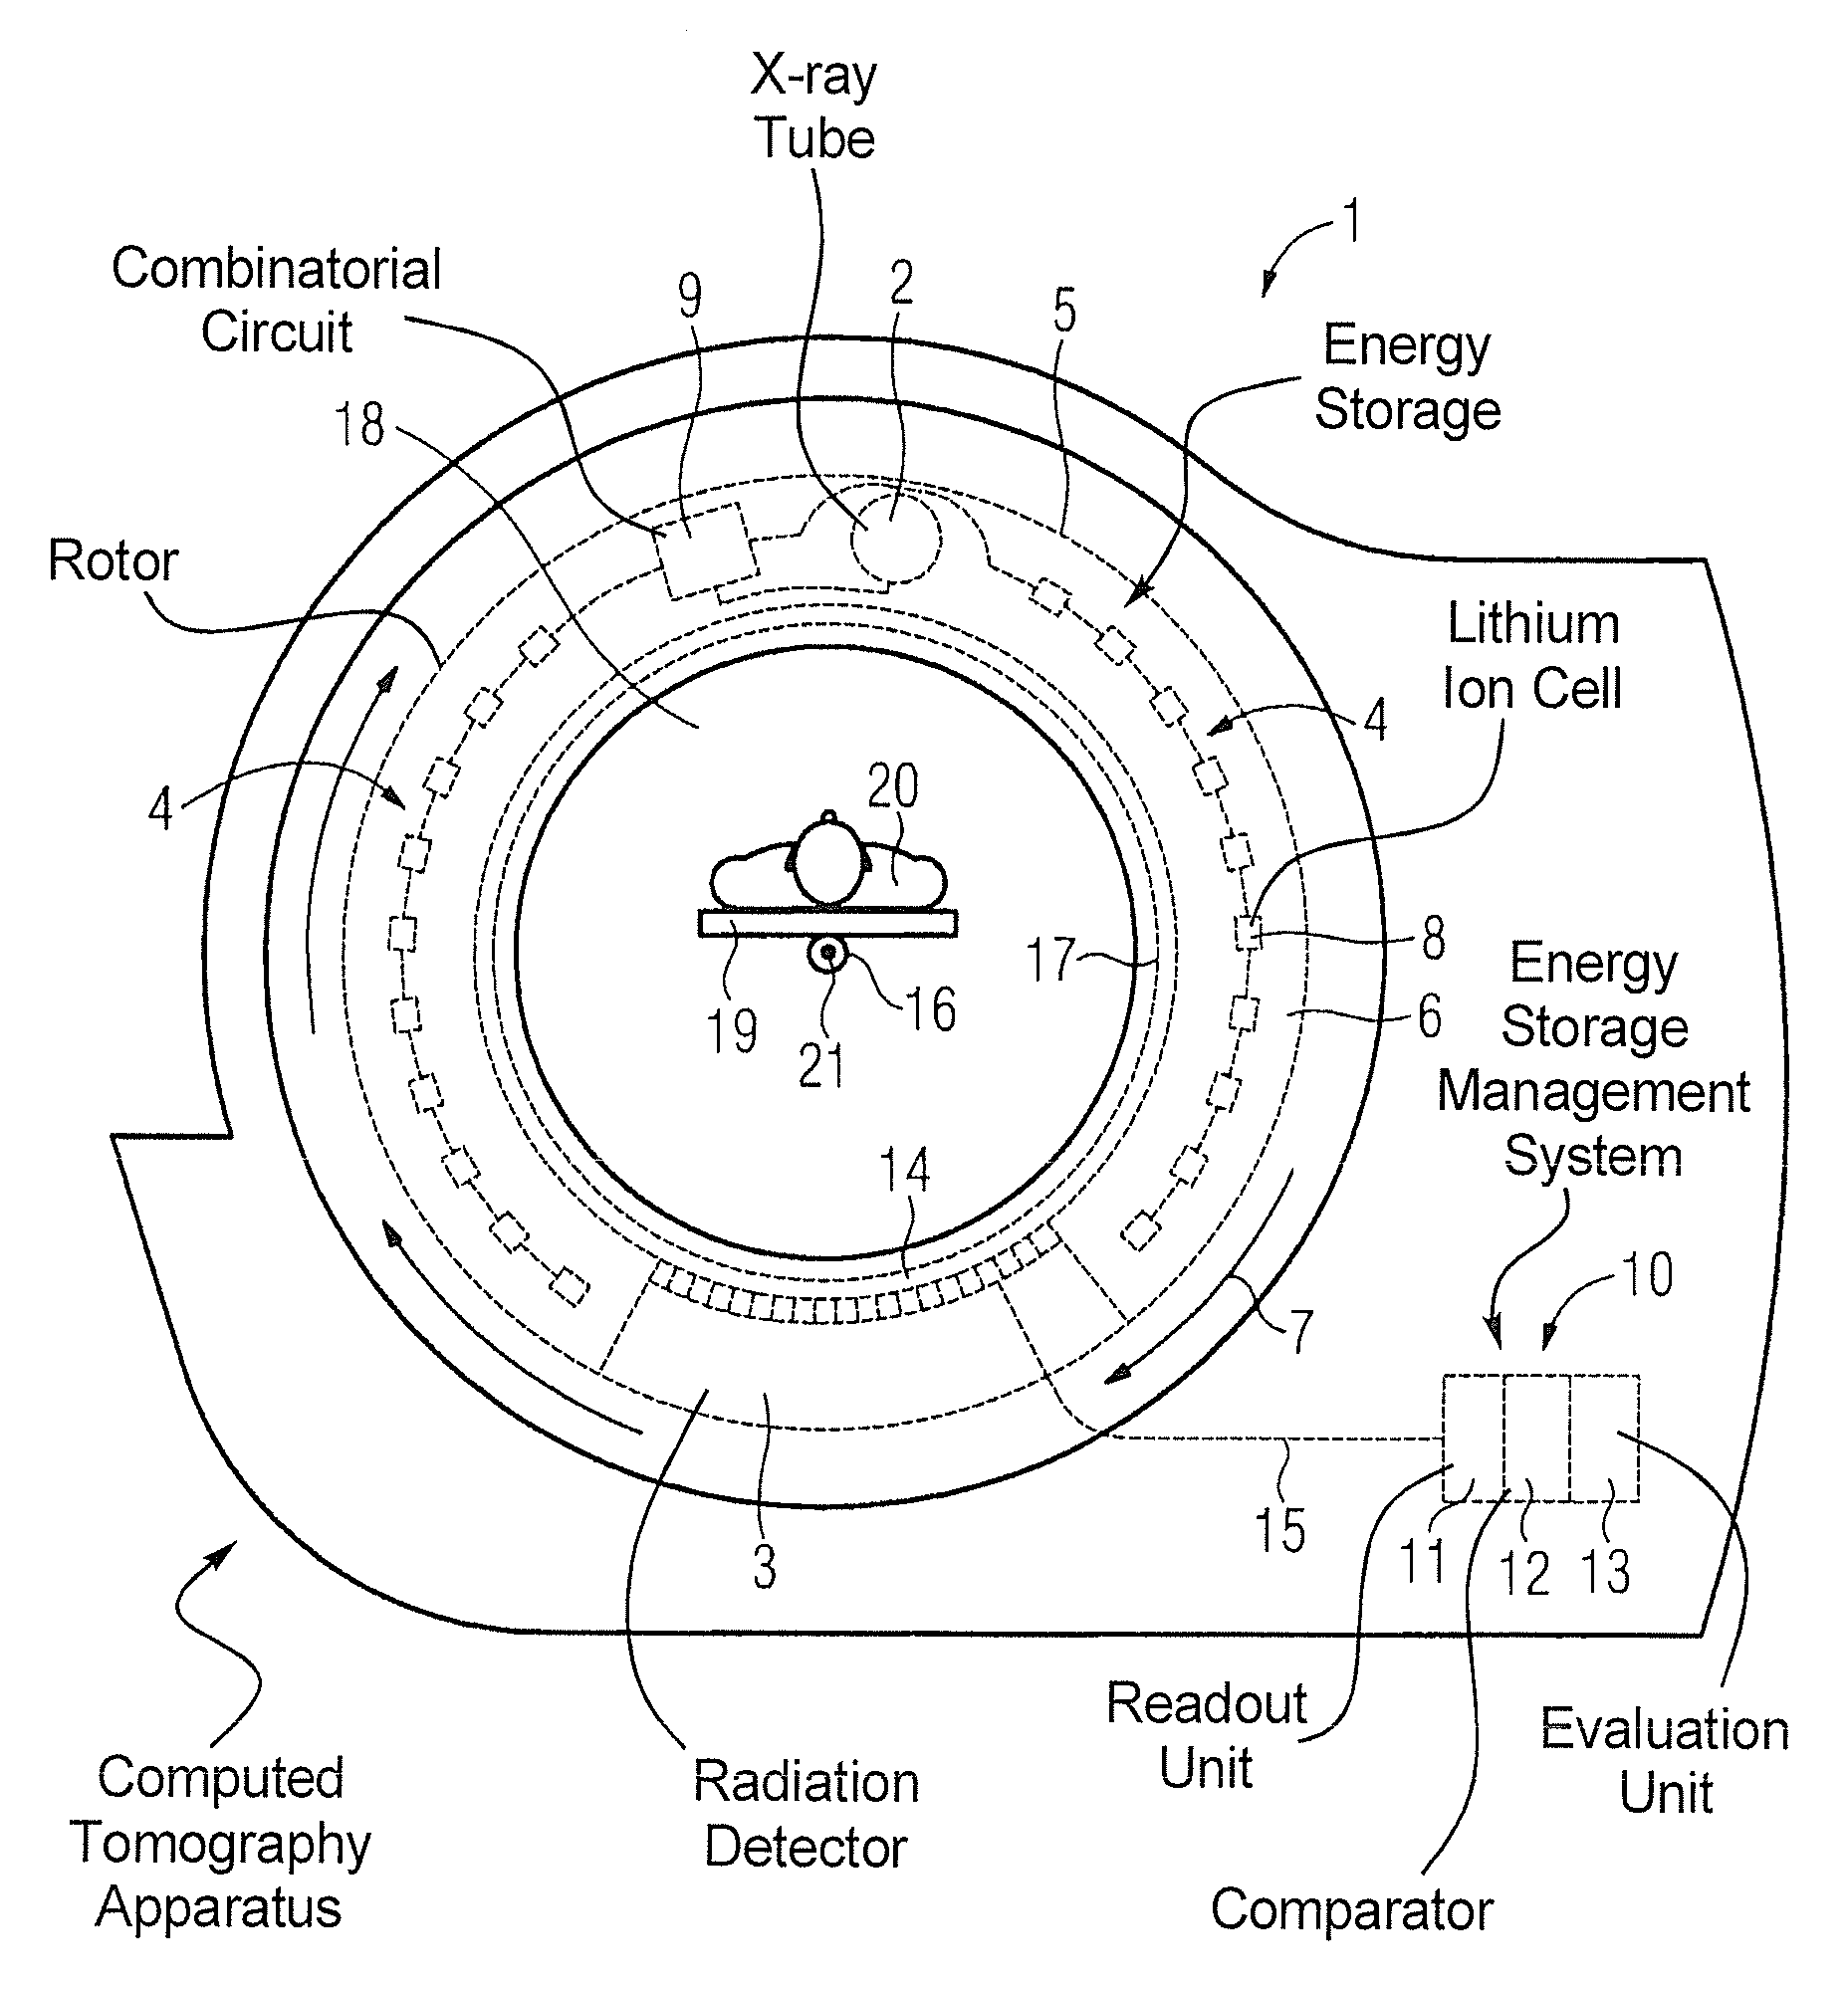 Imaging tomography apparatus with built-in energy storage to cover high power operation